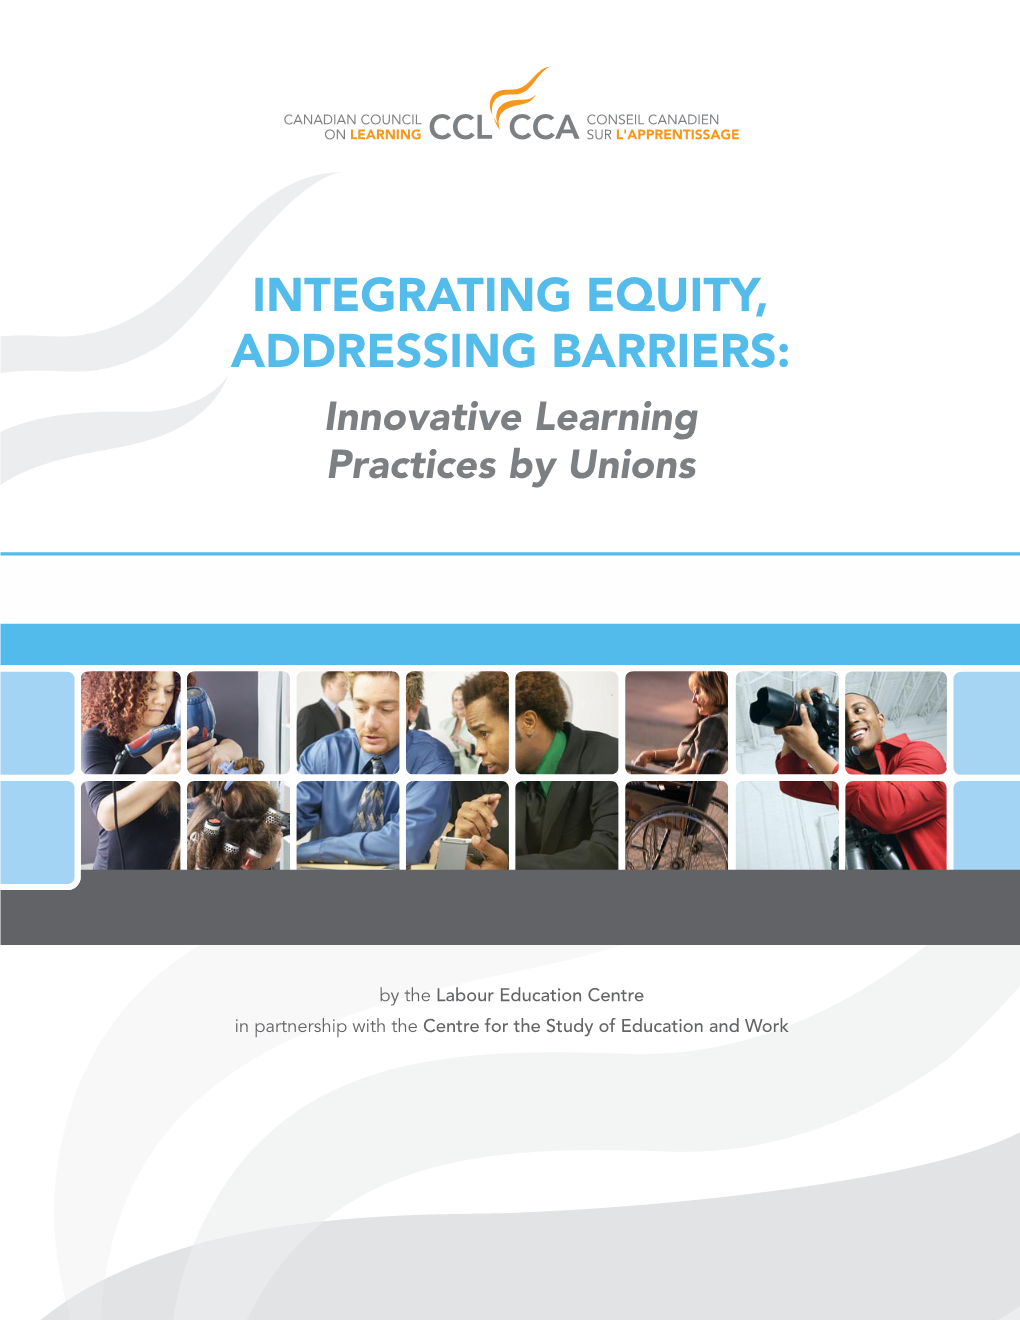 INTEGRATING EQUITY, ADDRESSING BARRIERS: Innovative Learning Practices by Unions